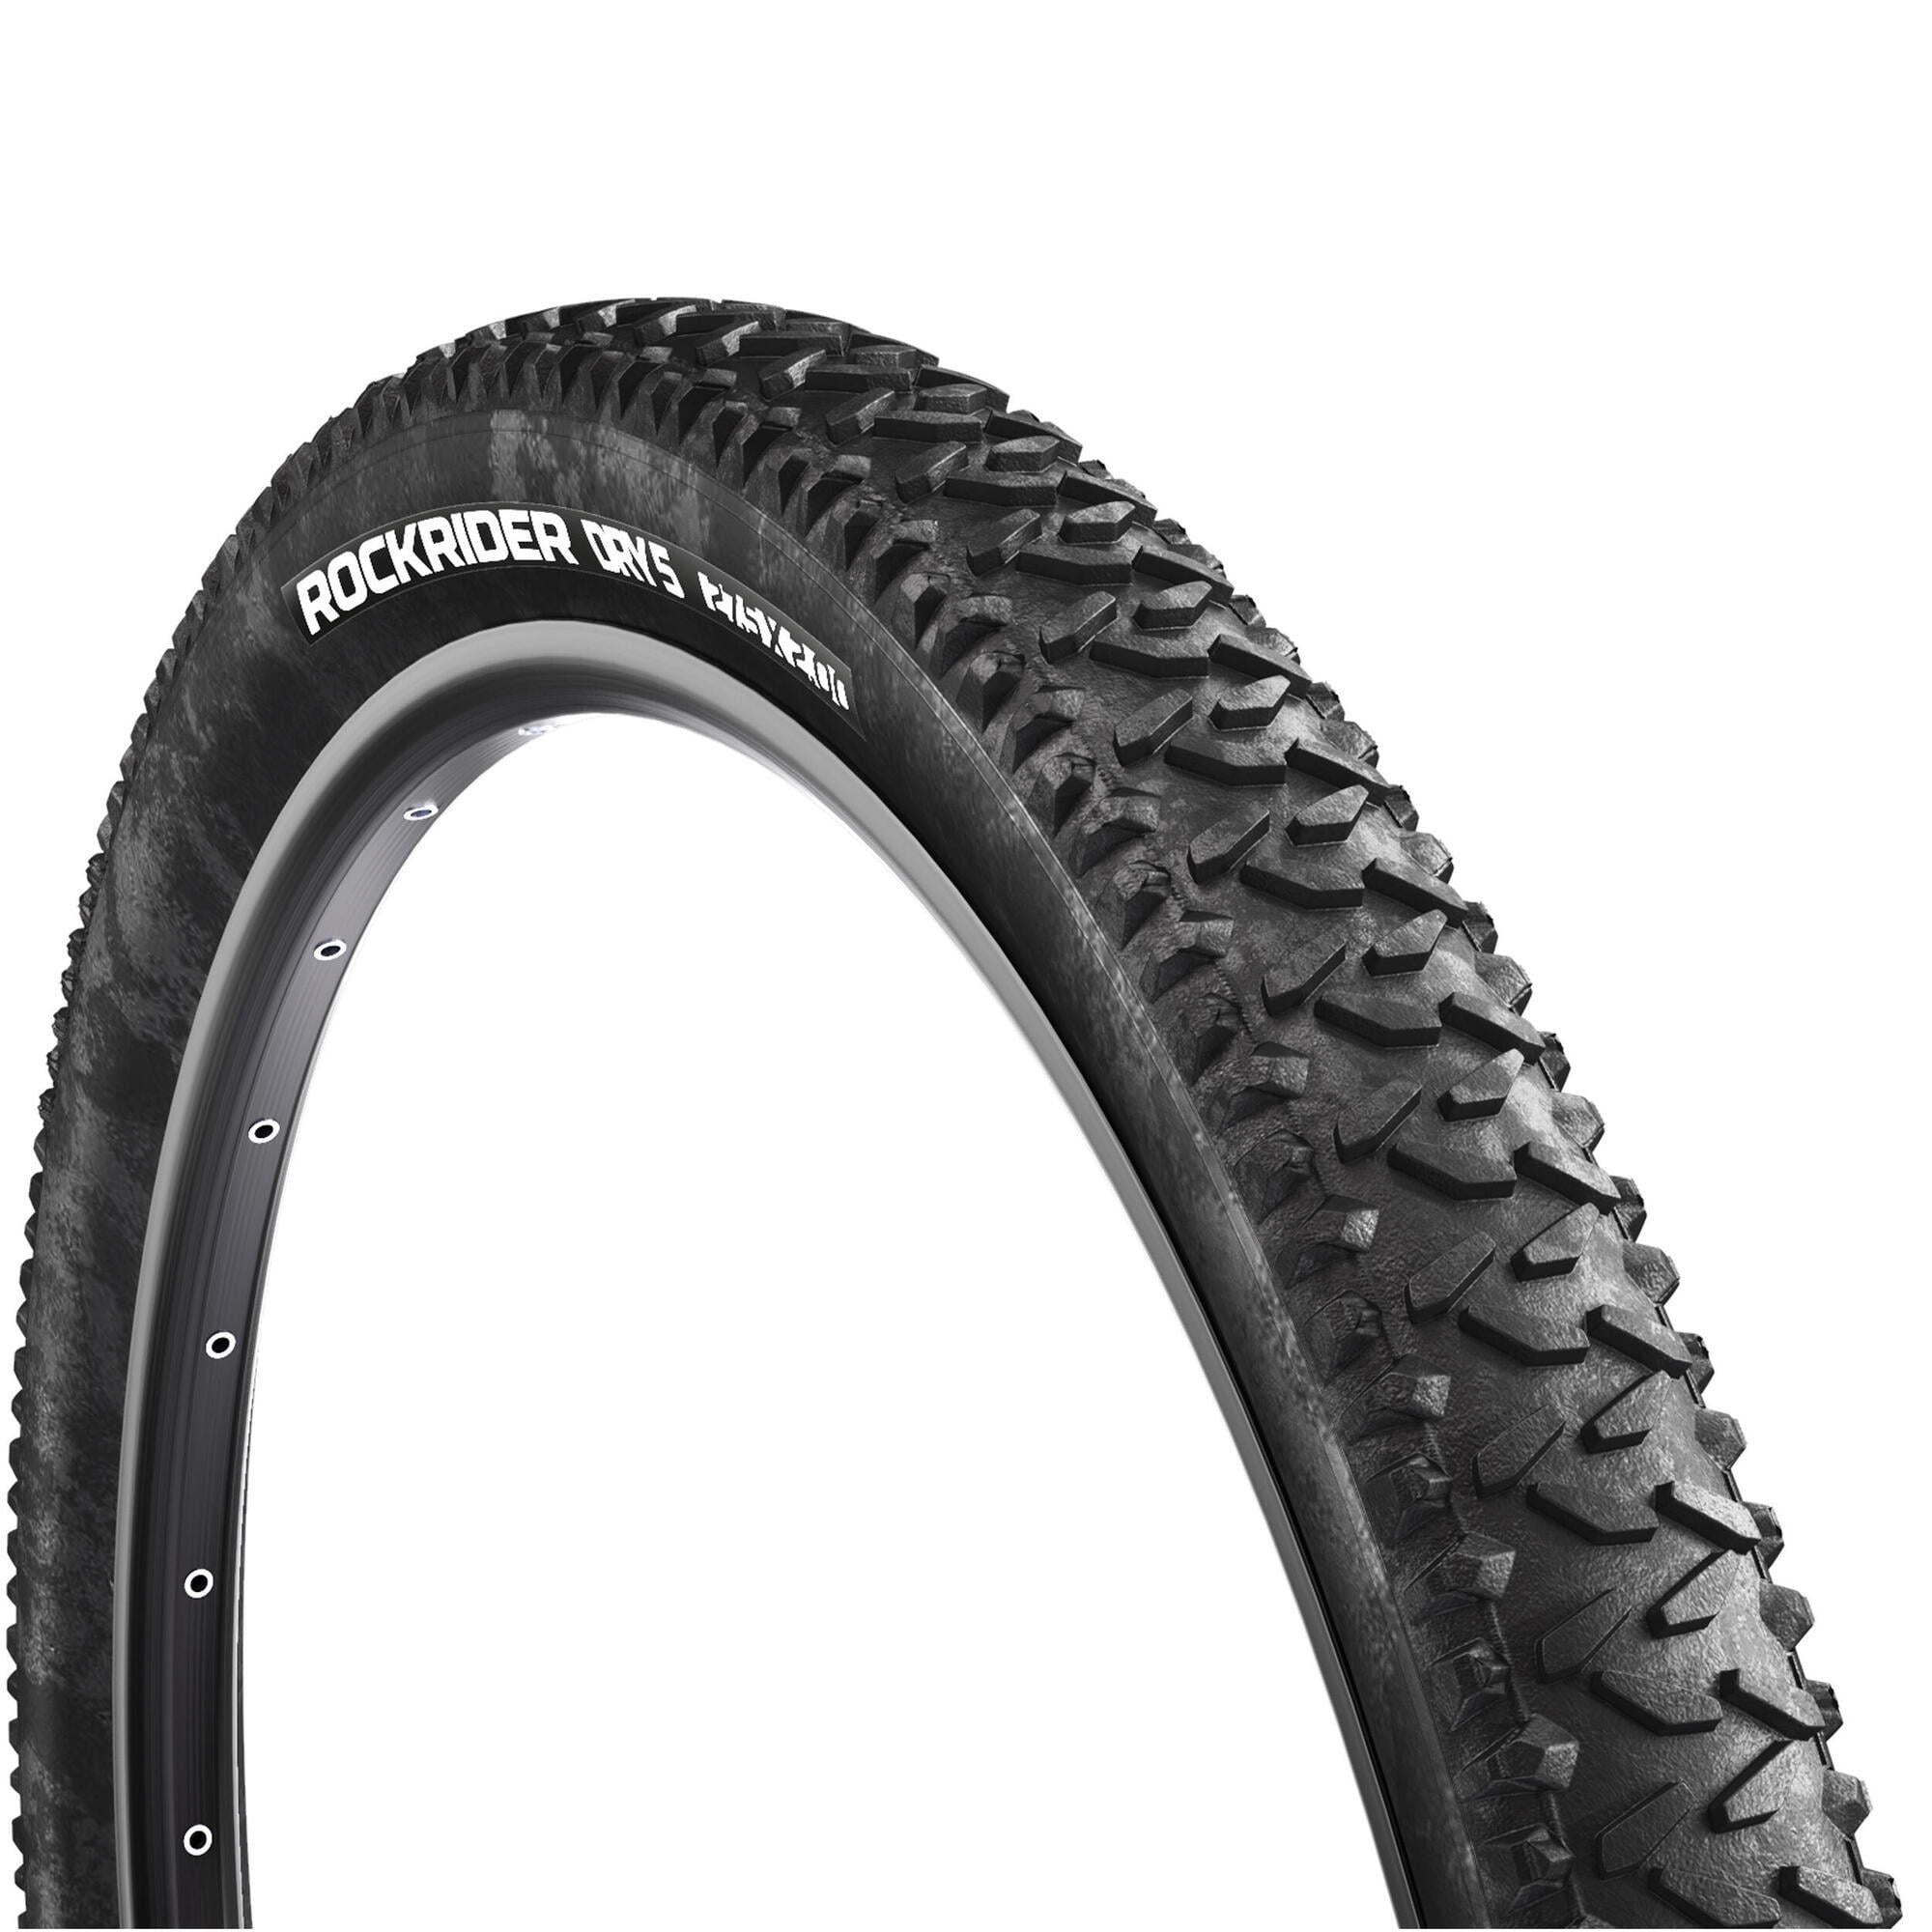 size 27.5 x 2.10 For On and Off-road Deli Tire All Terrain Mountain Bike Tyre